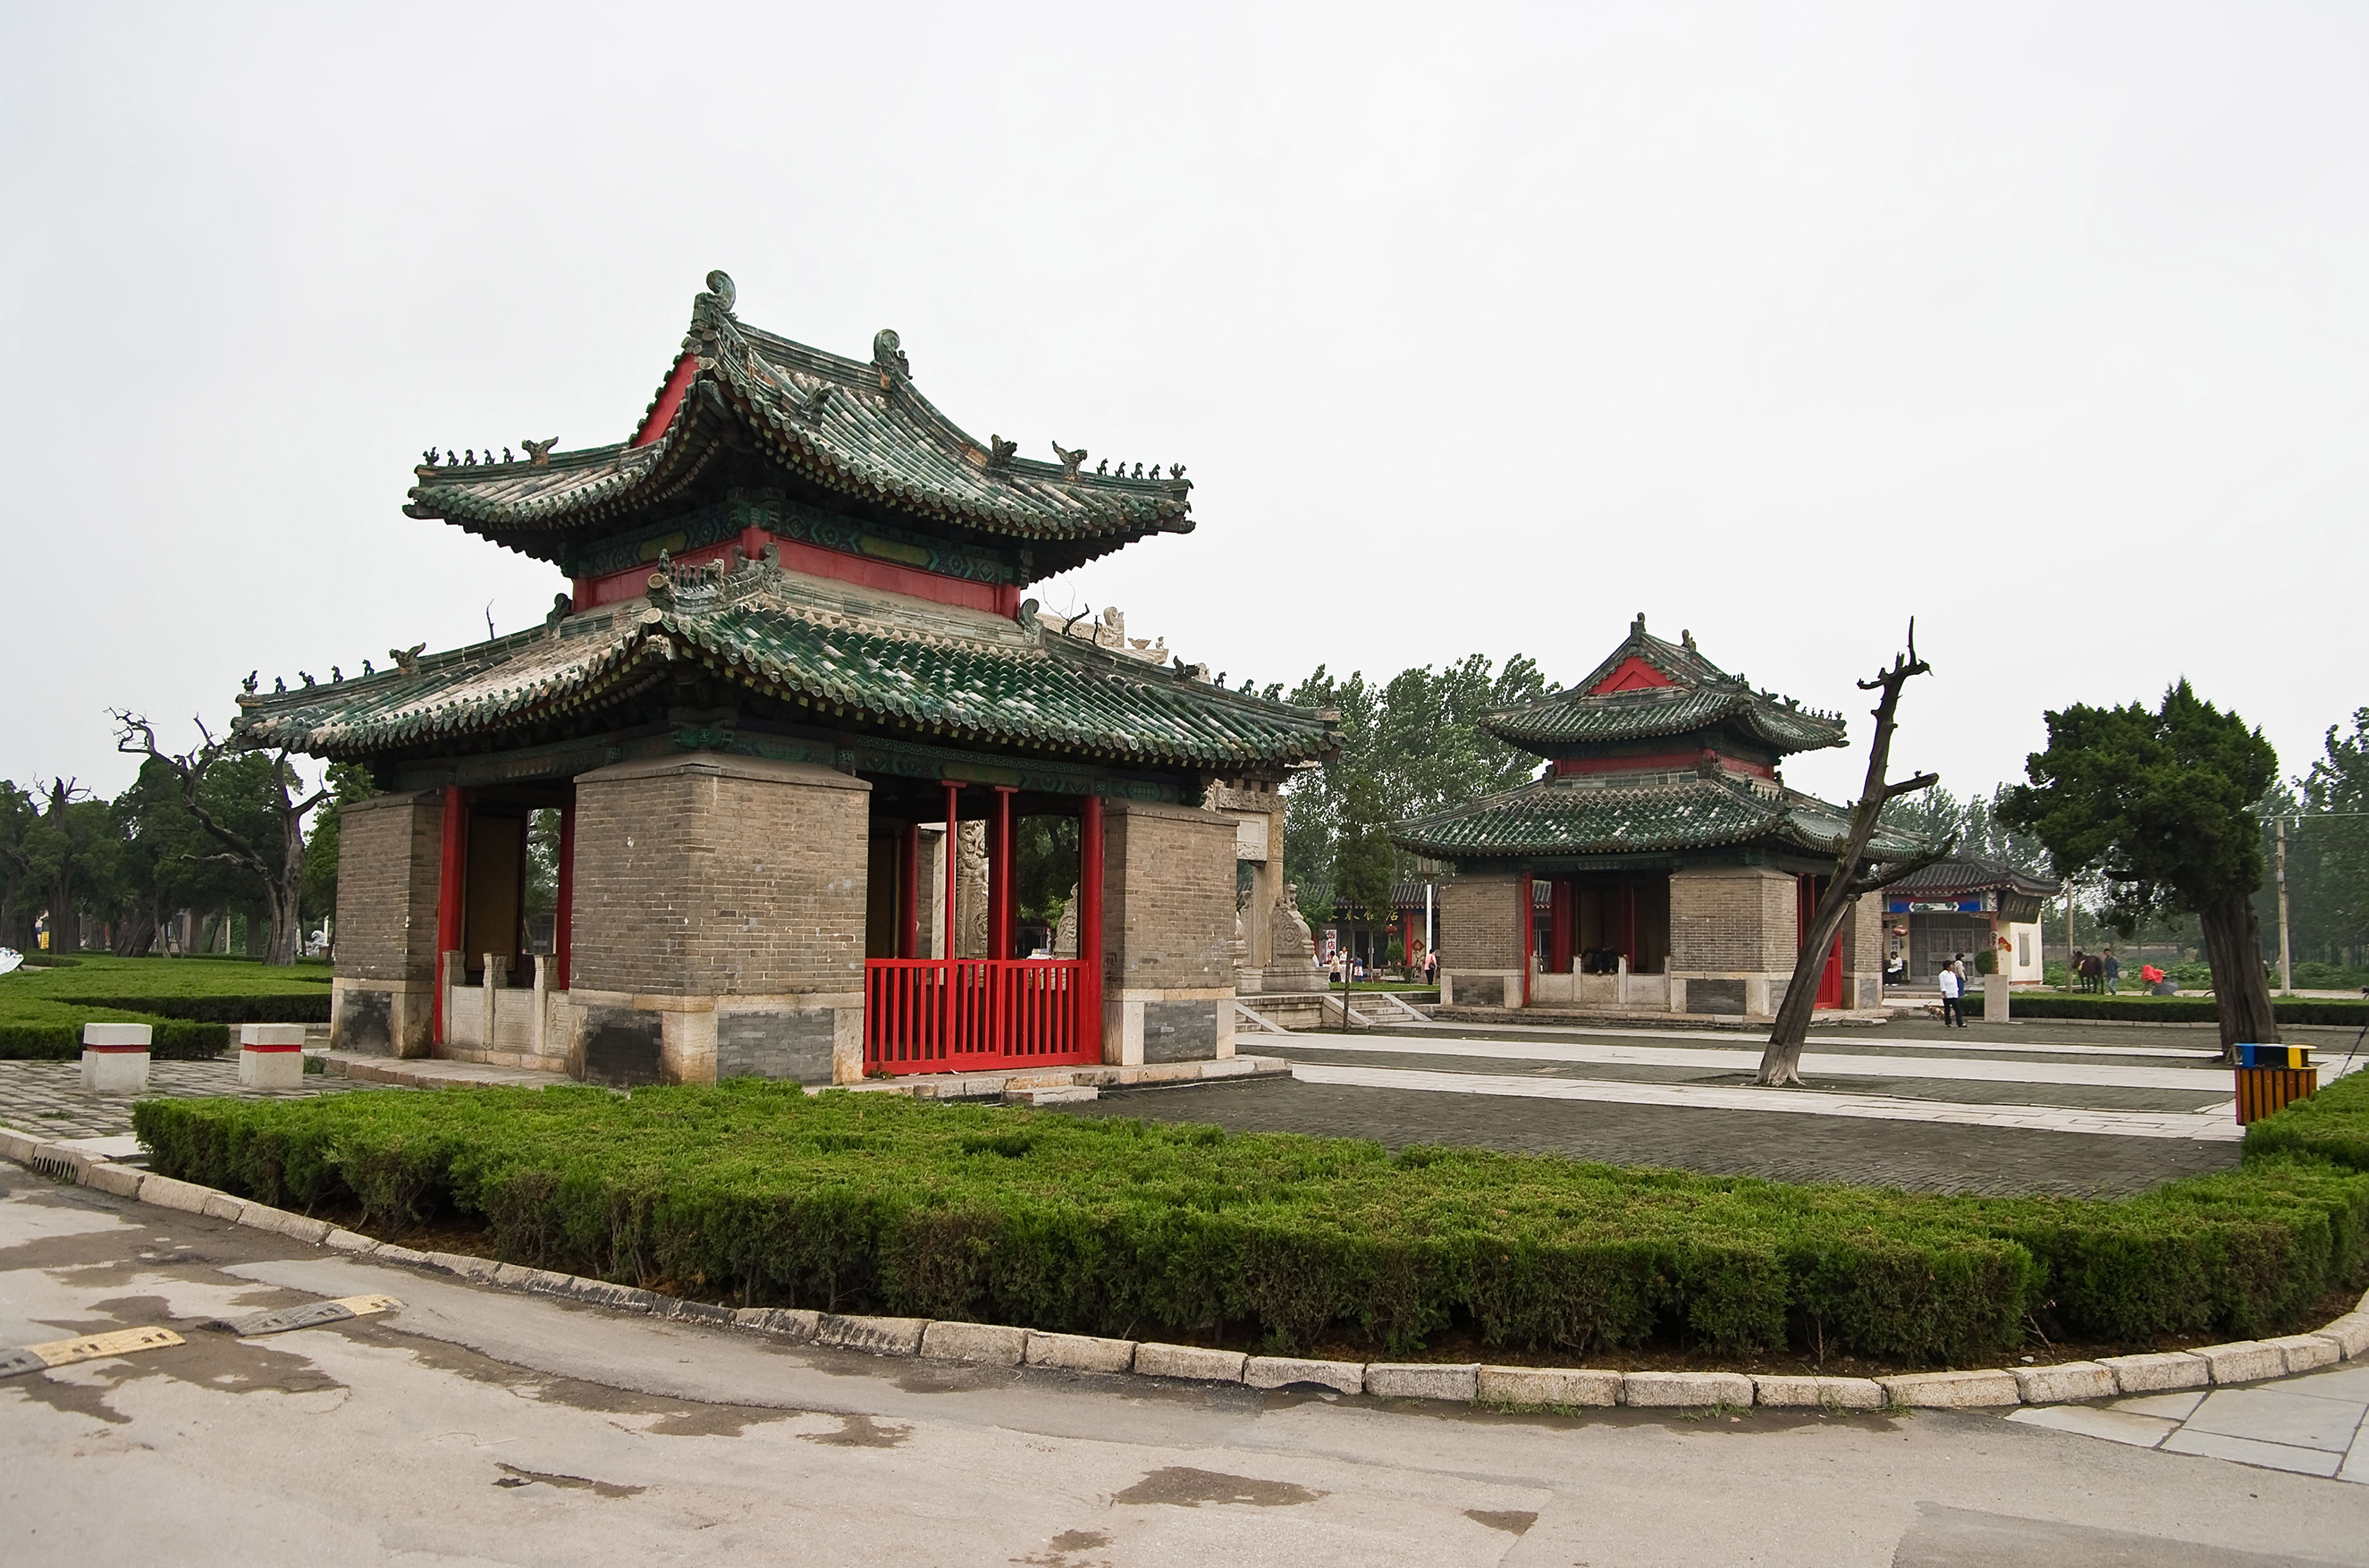 A view of memorial buildings at the Cemetery of Confucius in Qufu city, Shandong province, China, on May 22, 2014 (ImagineChina—AP)